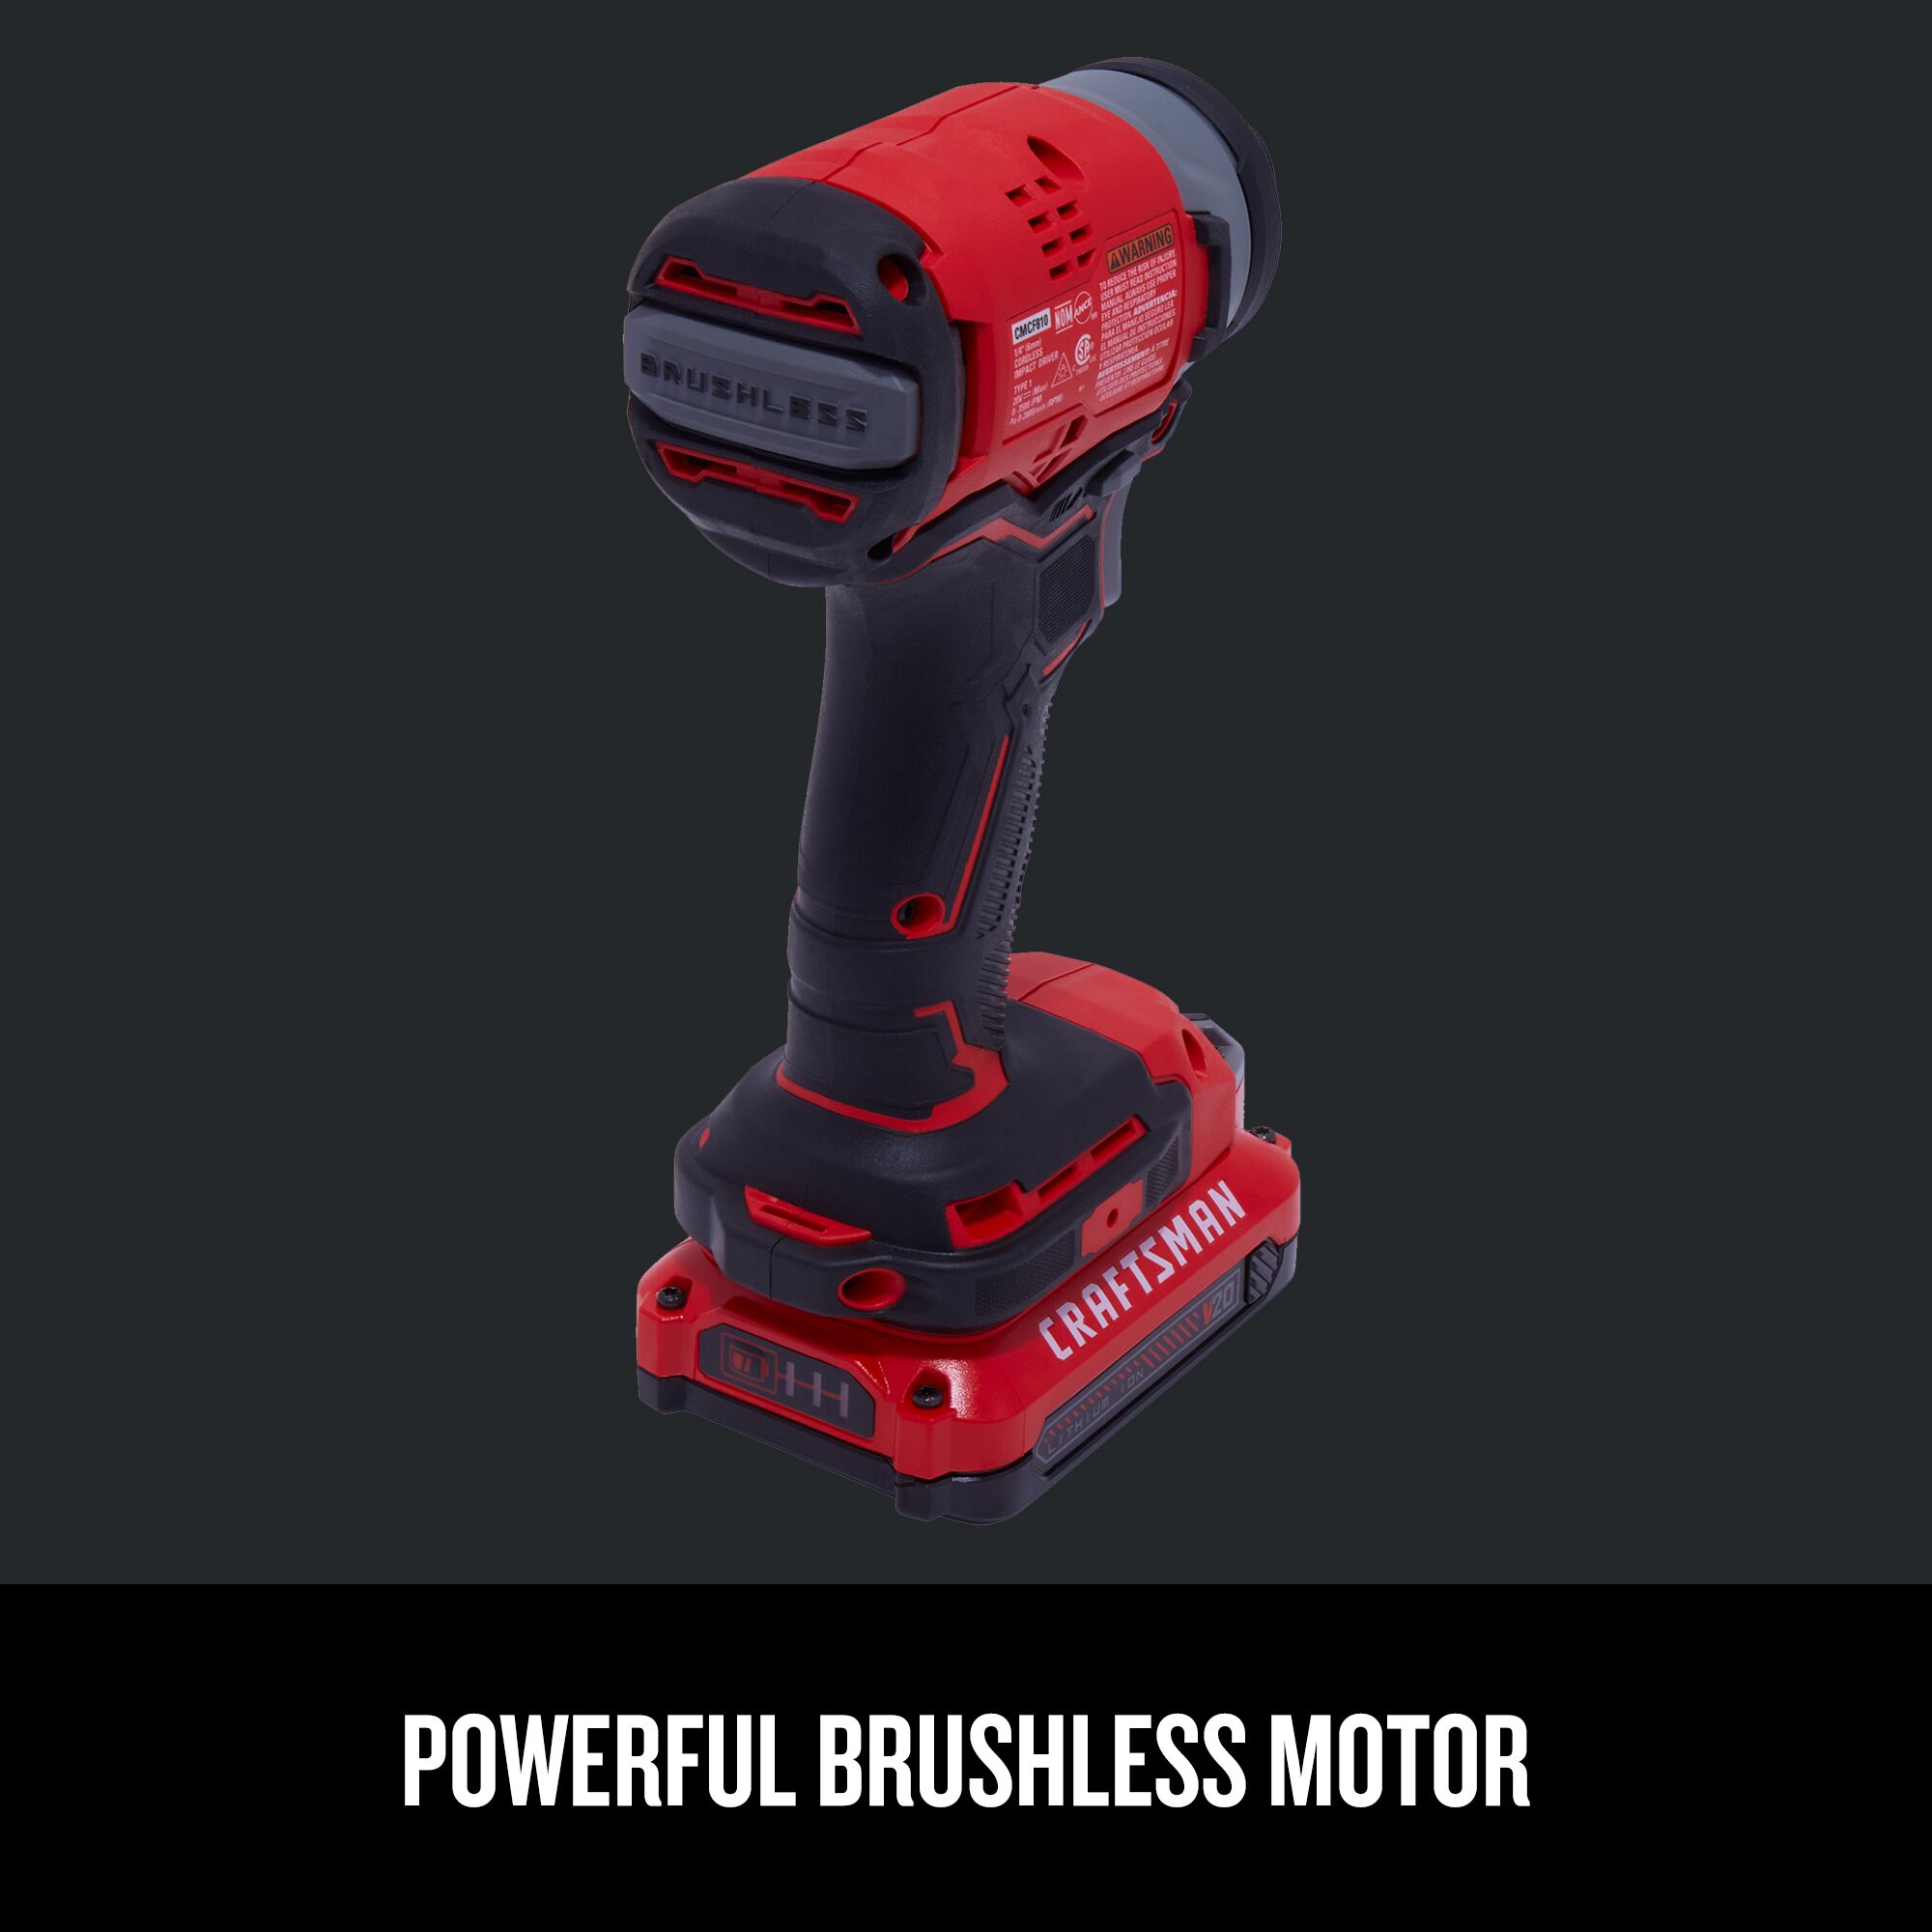 Front angled view of Craftsman 20V Max ¼ in. Brushless Cordless Impact Driver Kit showing powerful brushless motor.